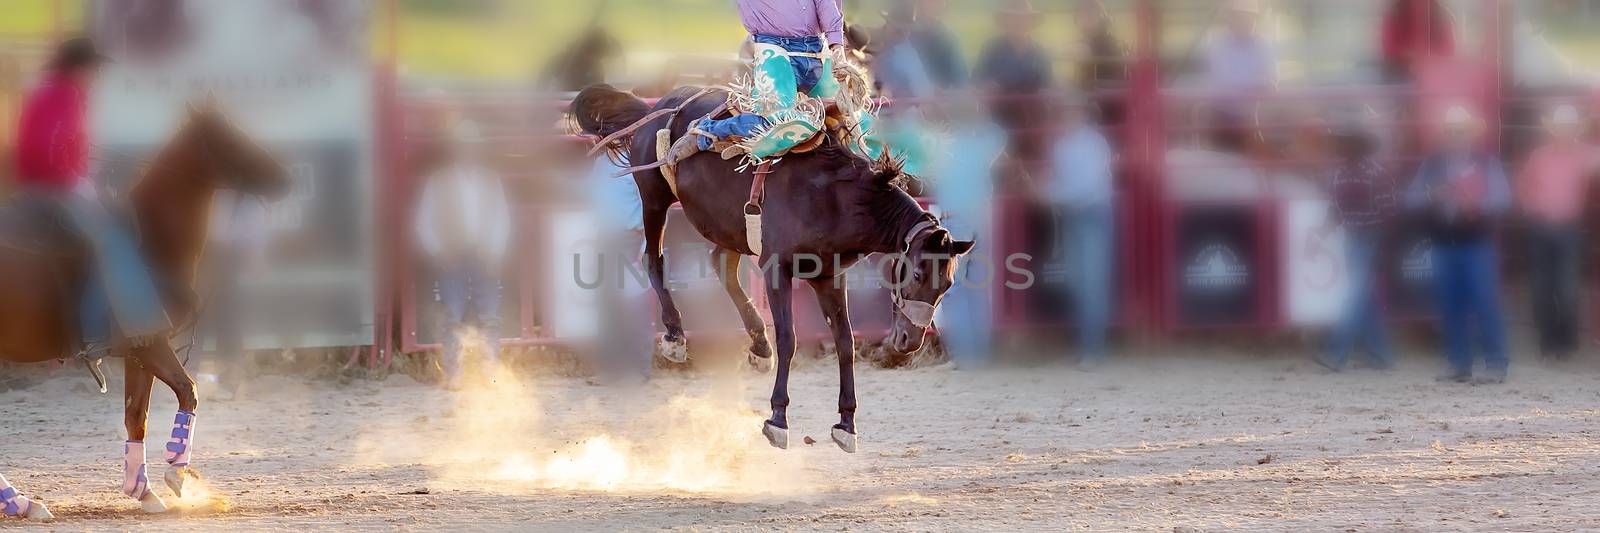 Bucking Horse Riding Rodeo Competition by 	JacksonStock